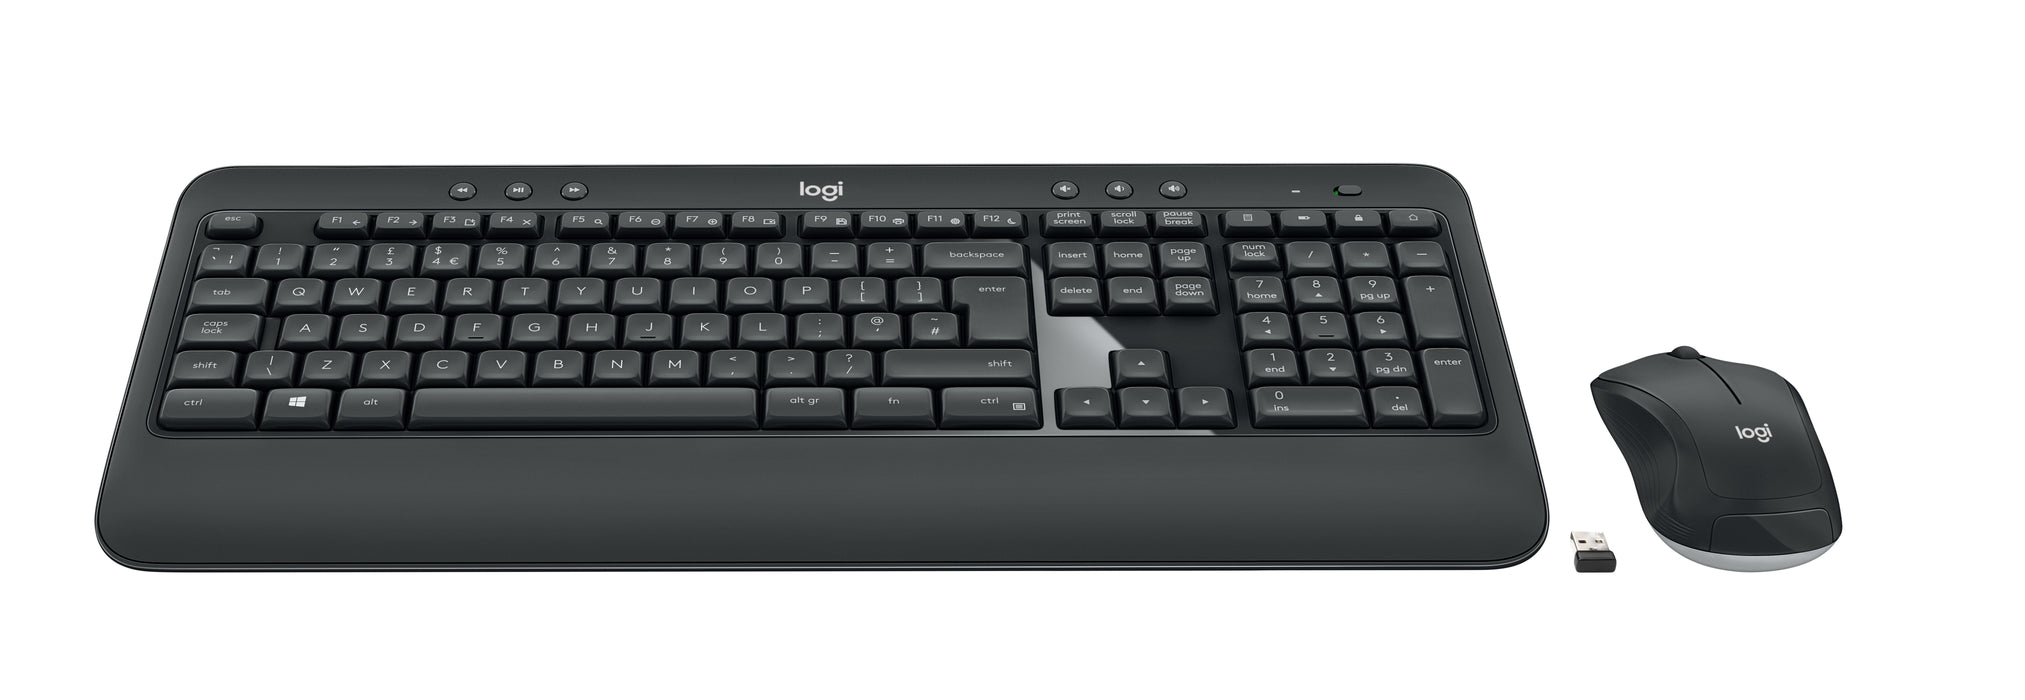 Logitech MK540 ADVANCED Wireless Keyboard and Mouse Combo, Wireless, USB, Membrane, AZERTY, Black, White, Mouse included